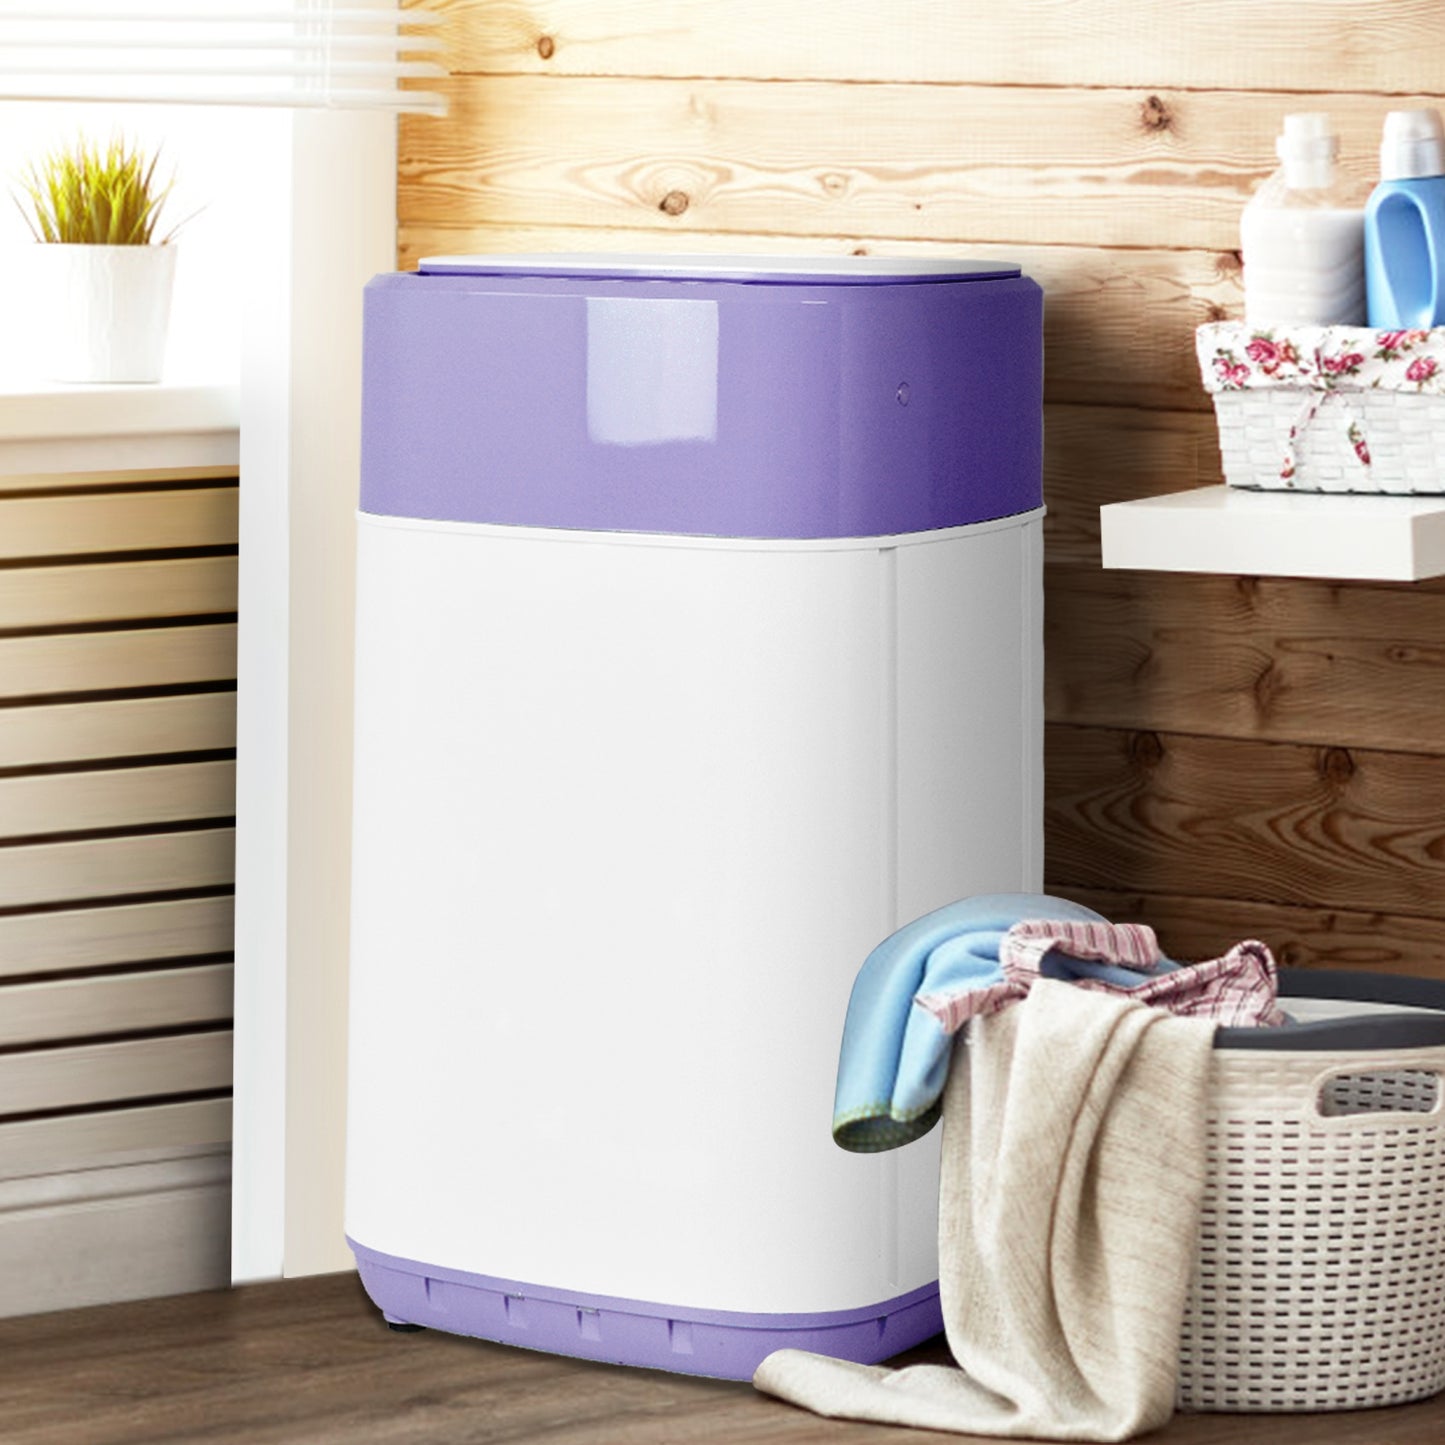 8lbs Portable Fully Automatic Washing Machine with Drain Pump-Purple